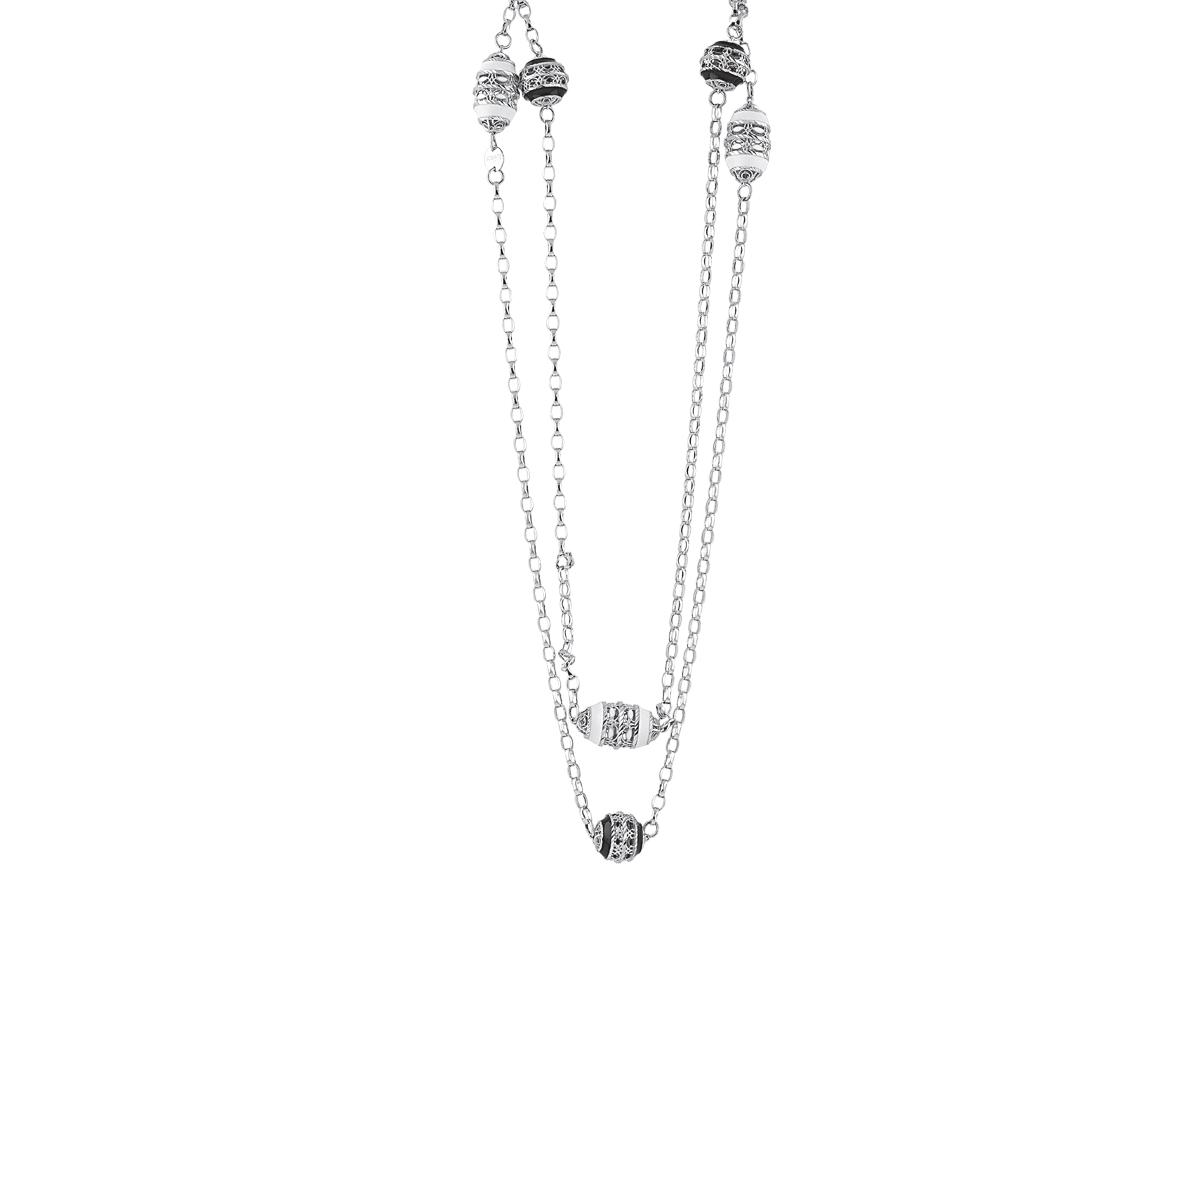 Chanel necklace in 925 rhodium-plated and enamelled silver - ZCL969-MB